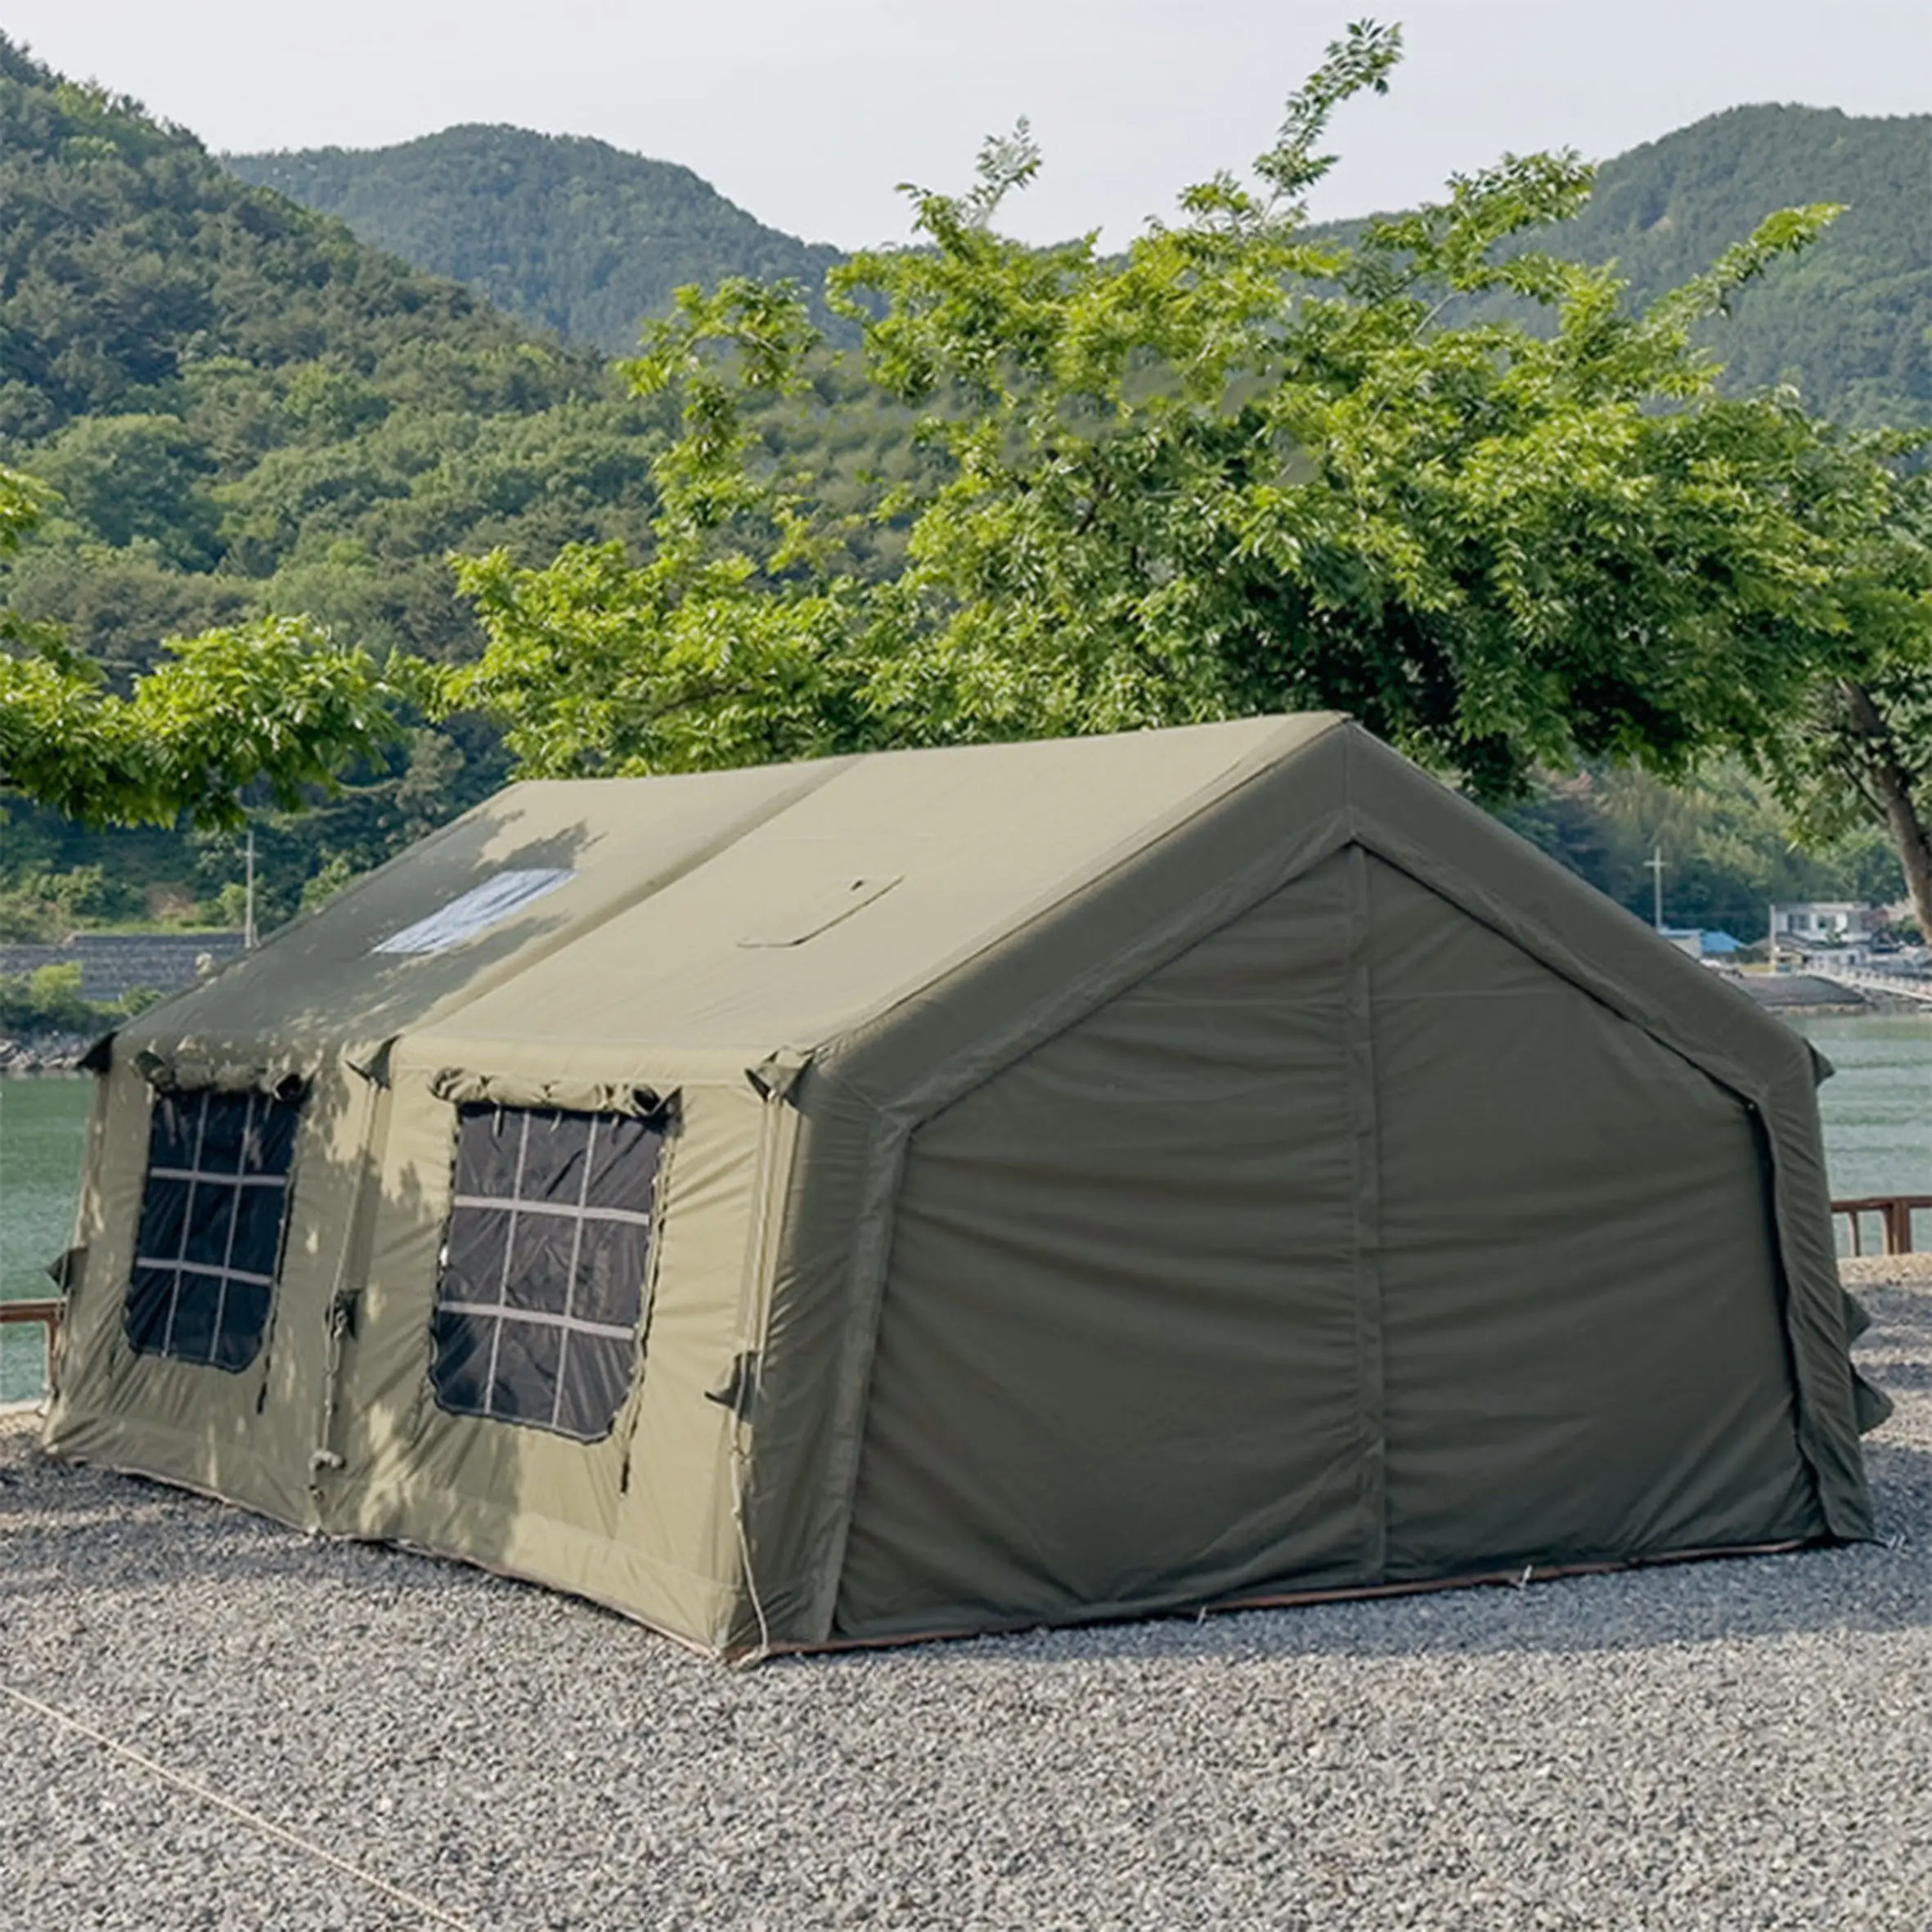 inflatable rapid deployment shelters medicalhospital shelter,for emergency eventsdisaster Tents for government in stock/